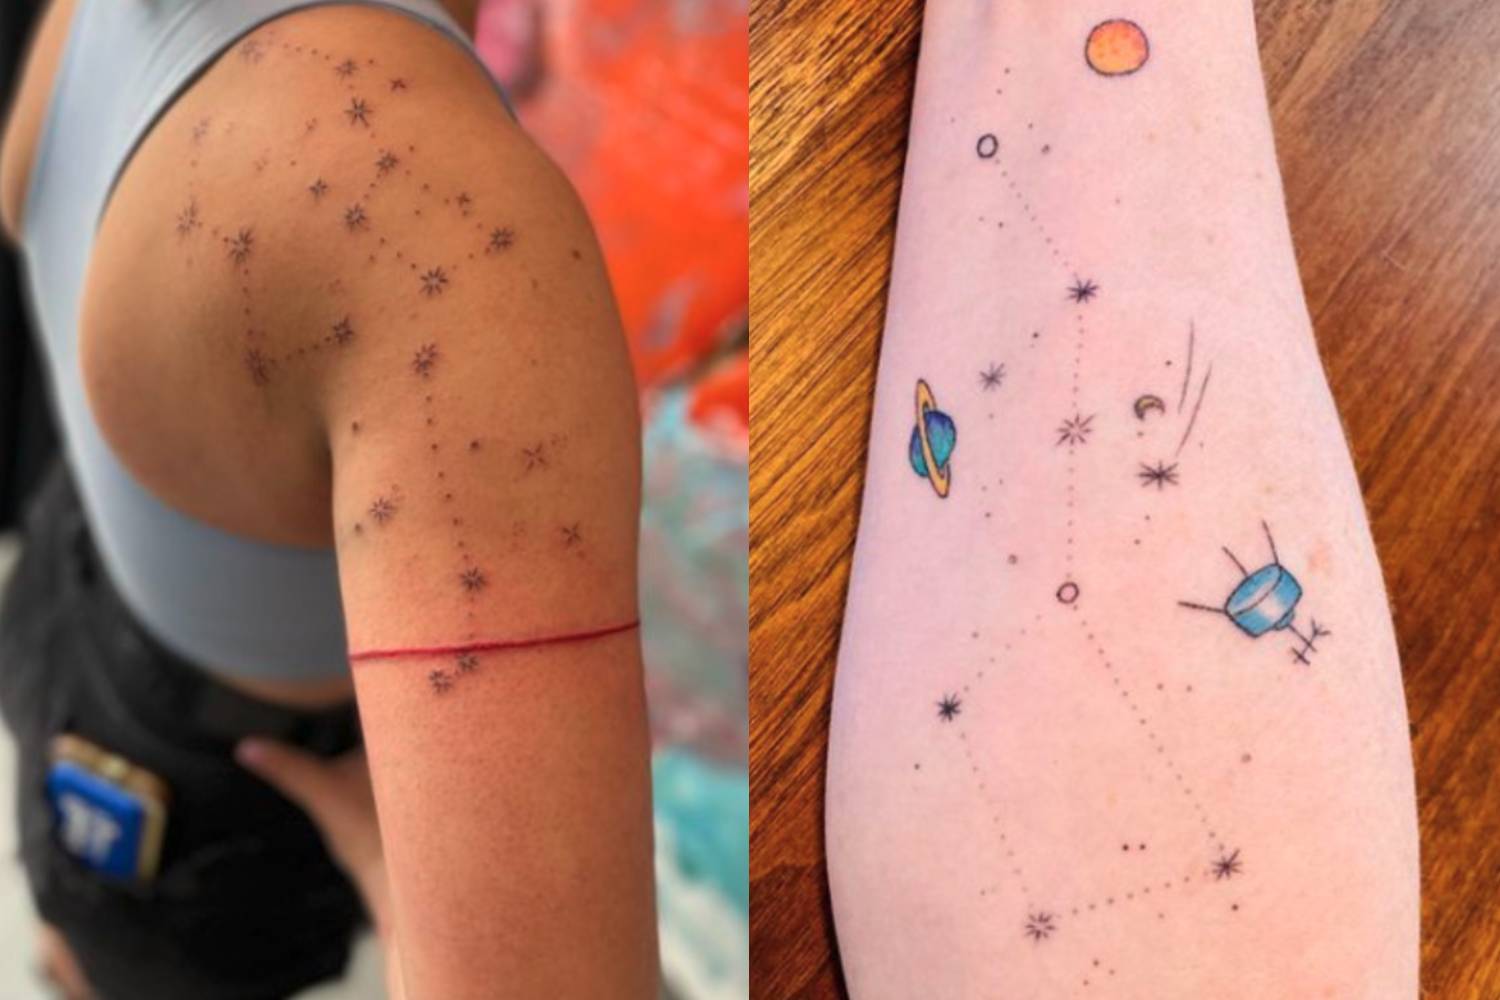 Jay on Twitter this is the big dipper and little dipper star  constellations for our big brother and little sister matching tattoos  represents protection and guidance linking the stars and family 